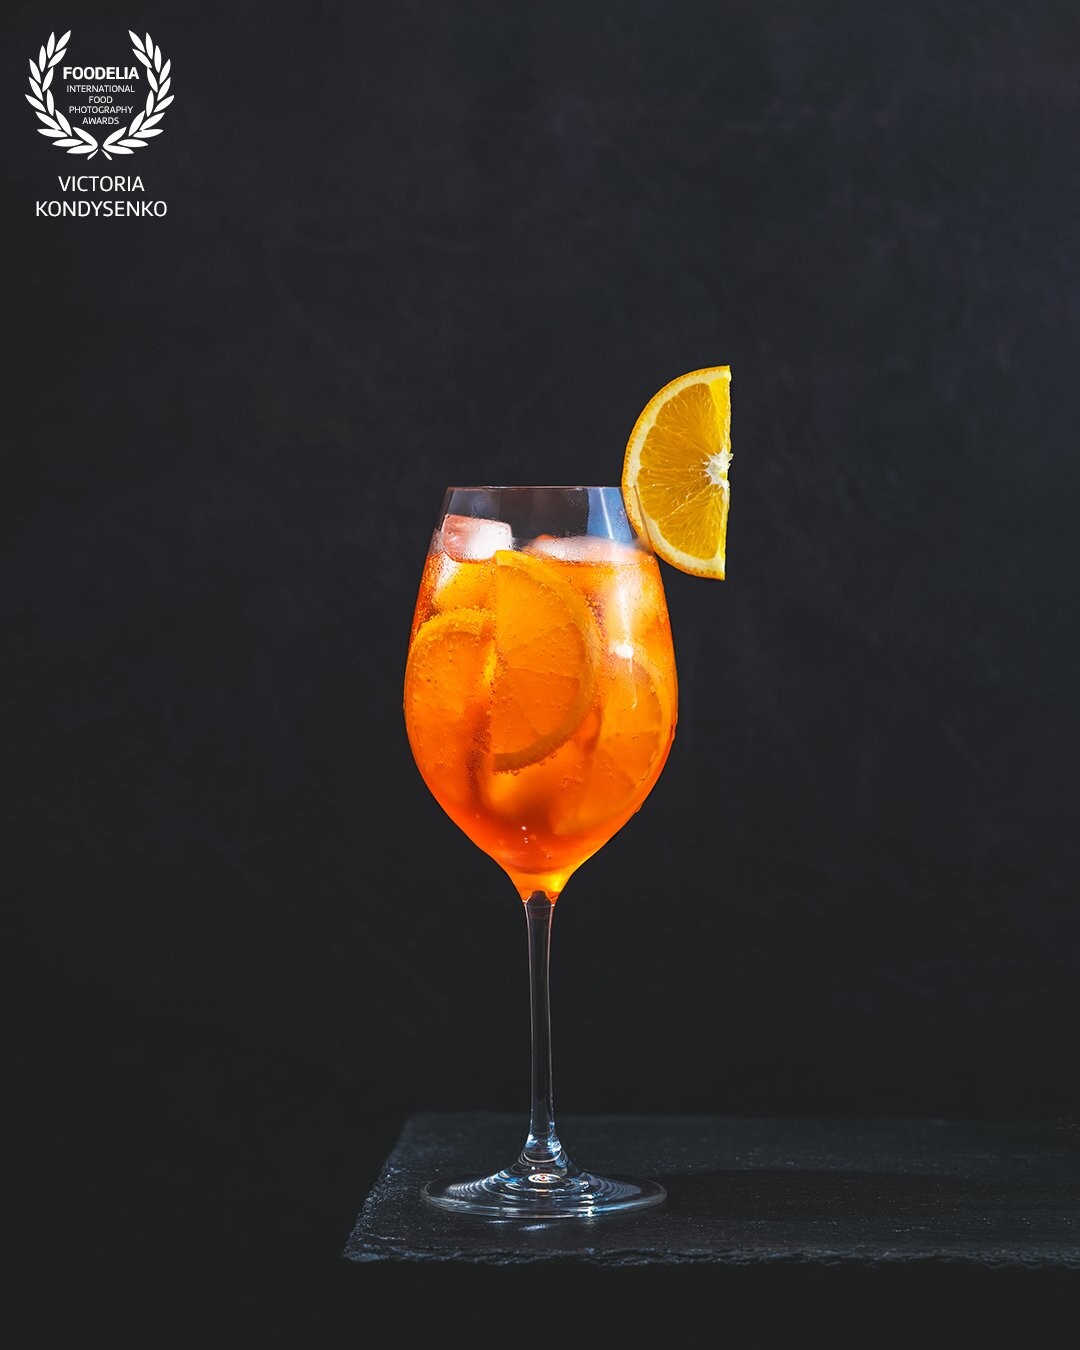 Spritz Veneziano (Aperol Spritz Cocktail)<br />
This classic Italian aperitif cocktail is the color of a sunset and capable of brightening any ordinary afternoon with its light and refreshing mix of sweet, crisp, and bitter.